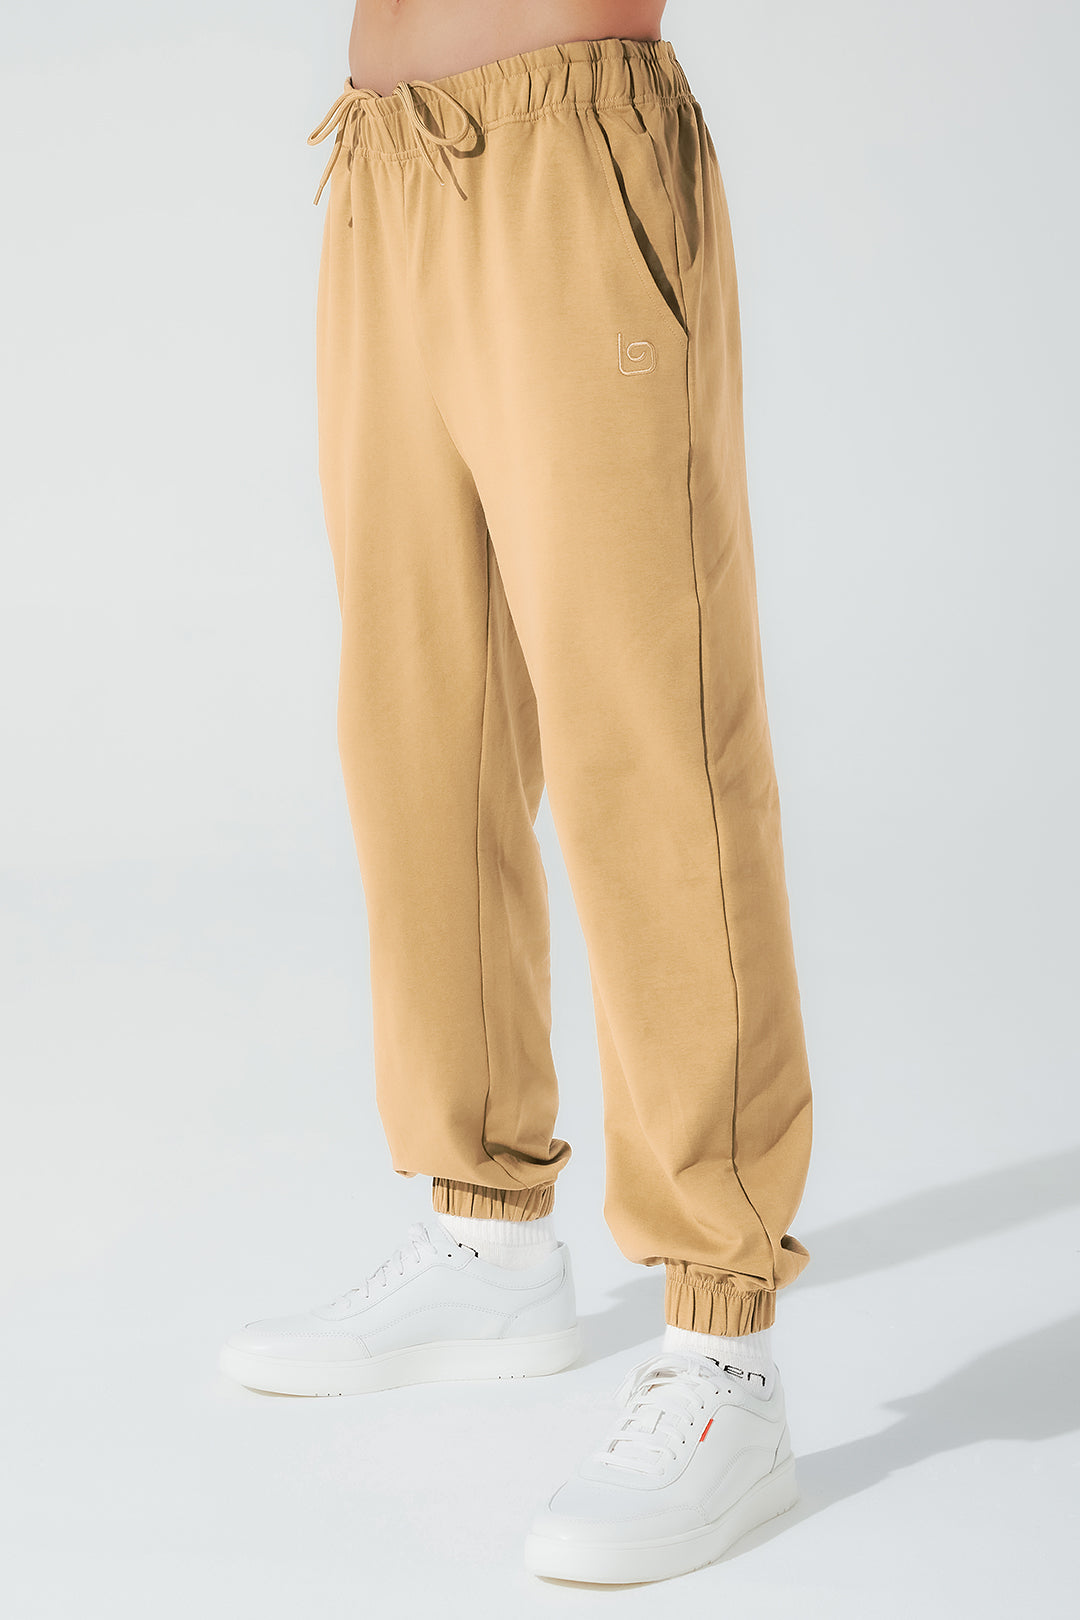 Beige cappuccino men's sweatpants and trousers by Janet, style OW-0034-MTR-BG, in image 2.